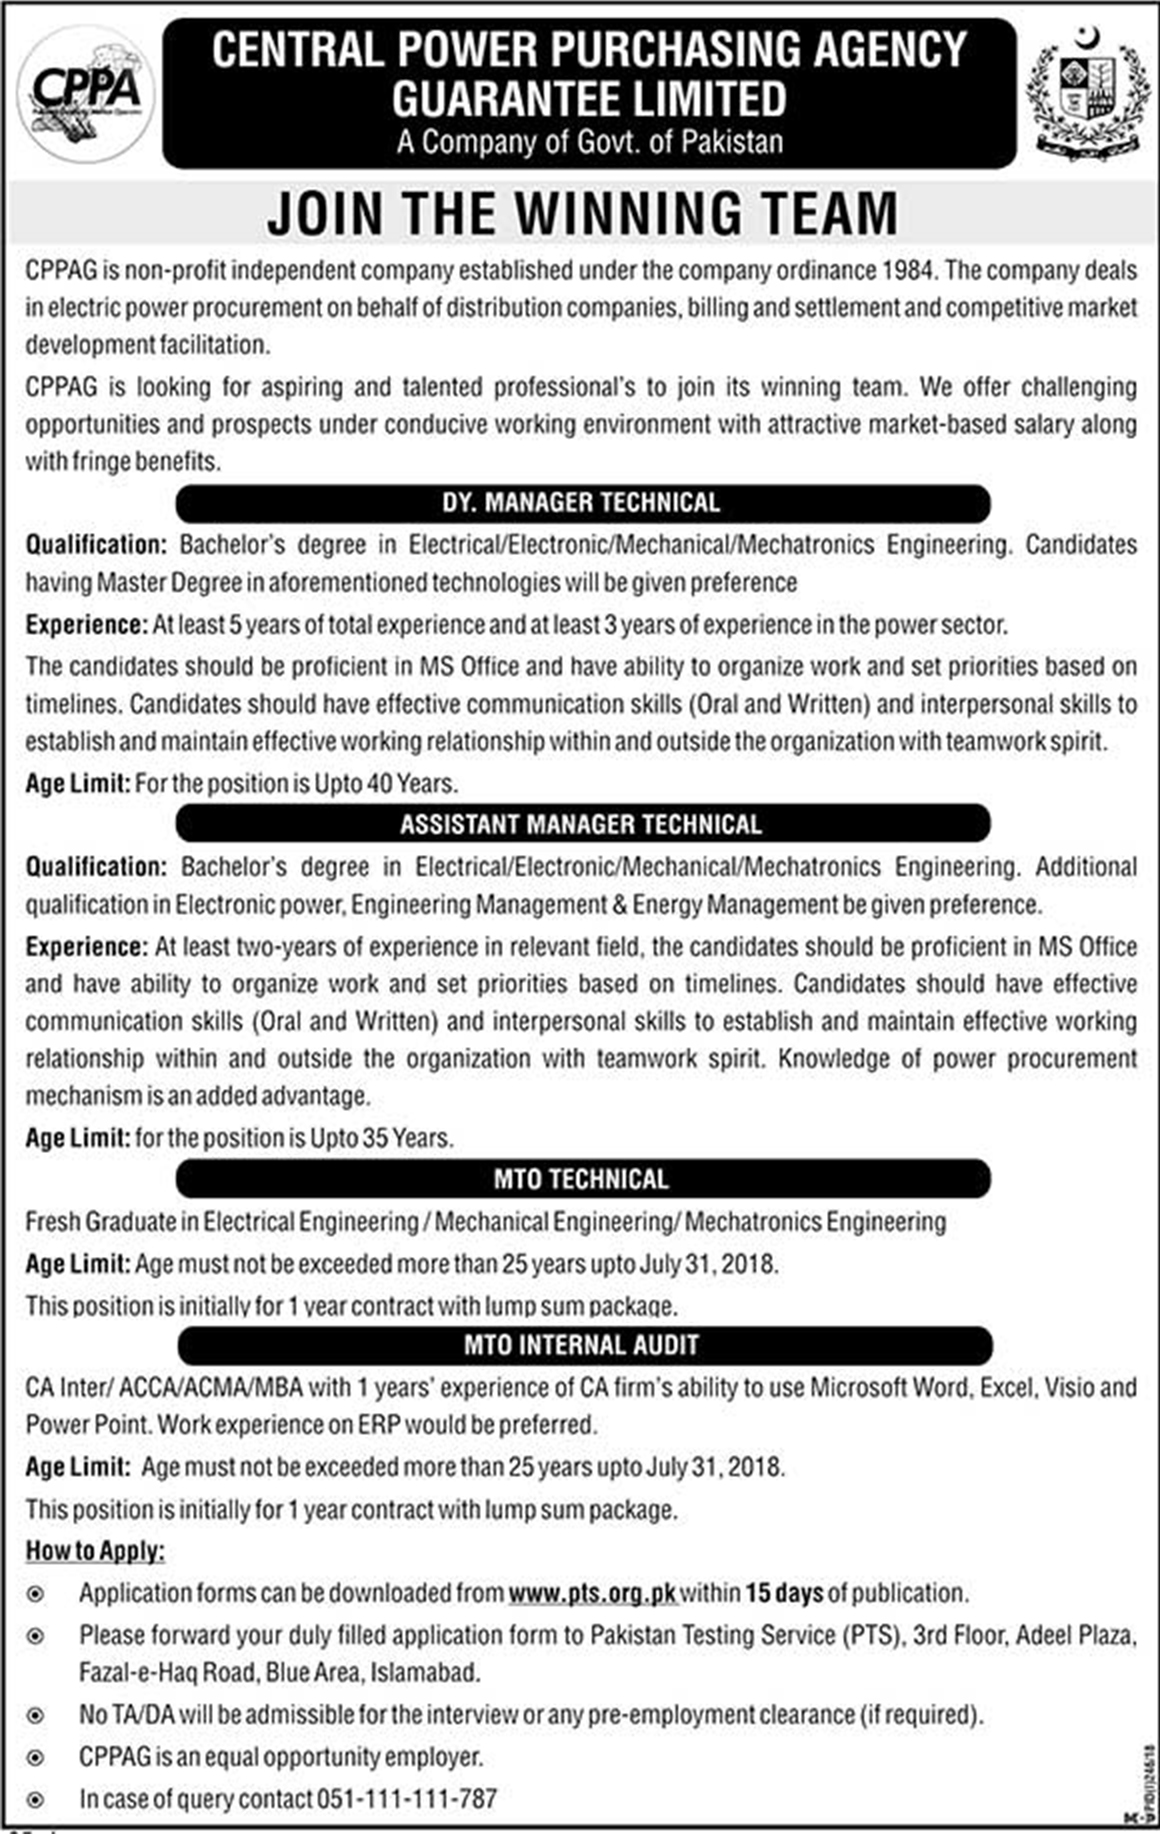 Central Power Purchasing Agency Guarantee Limited CPPAG Jobs 2018